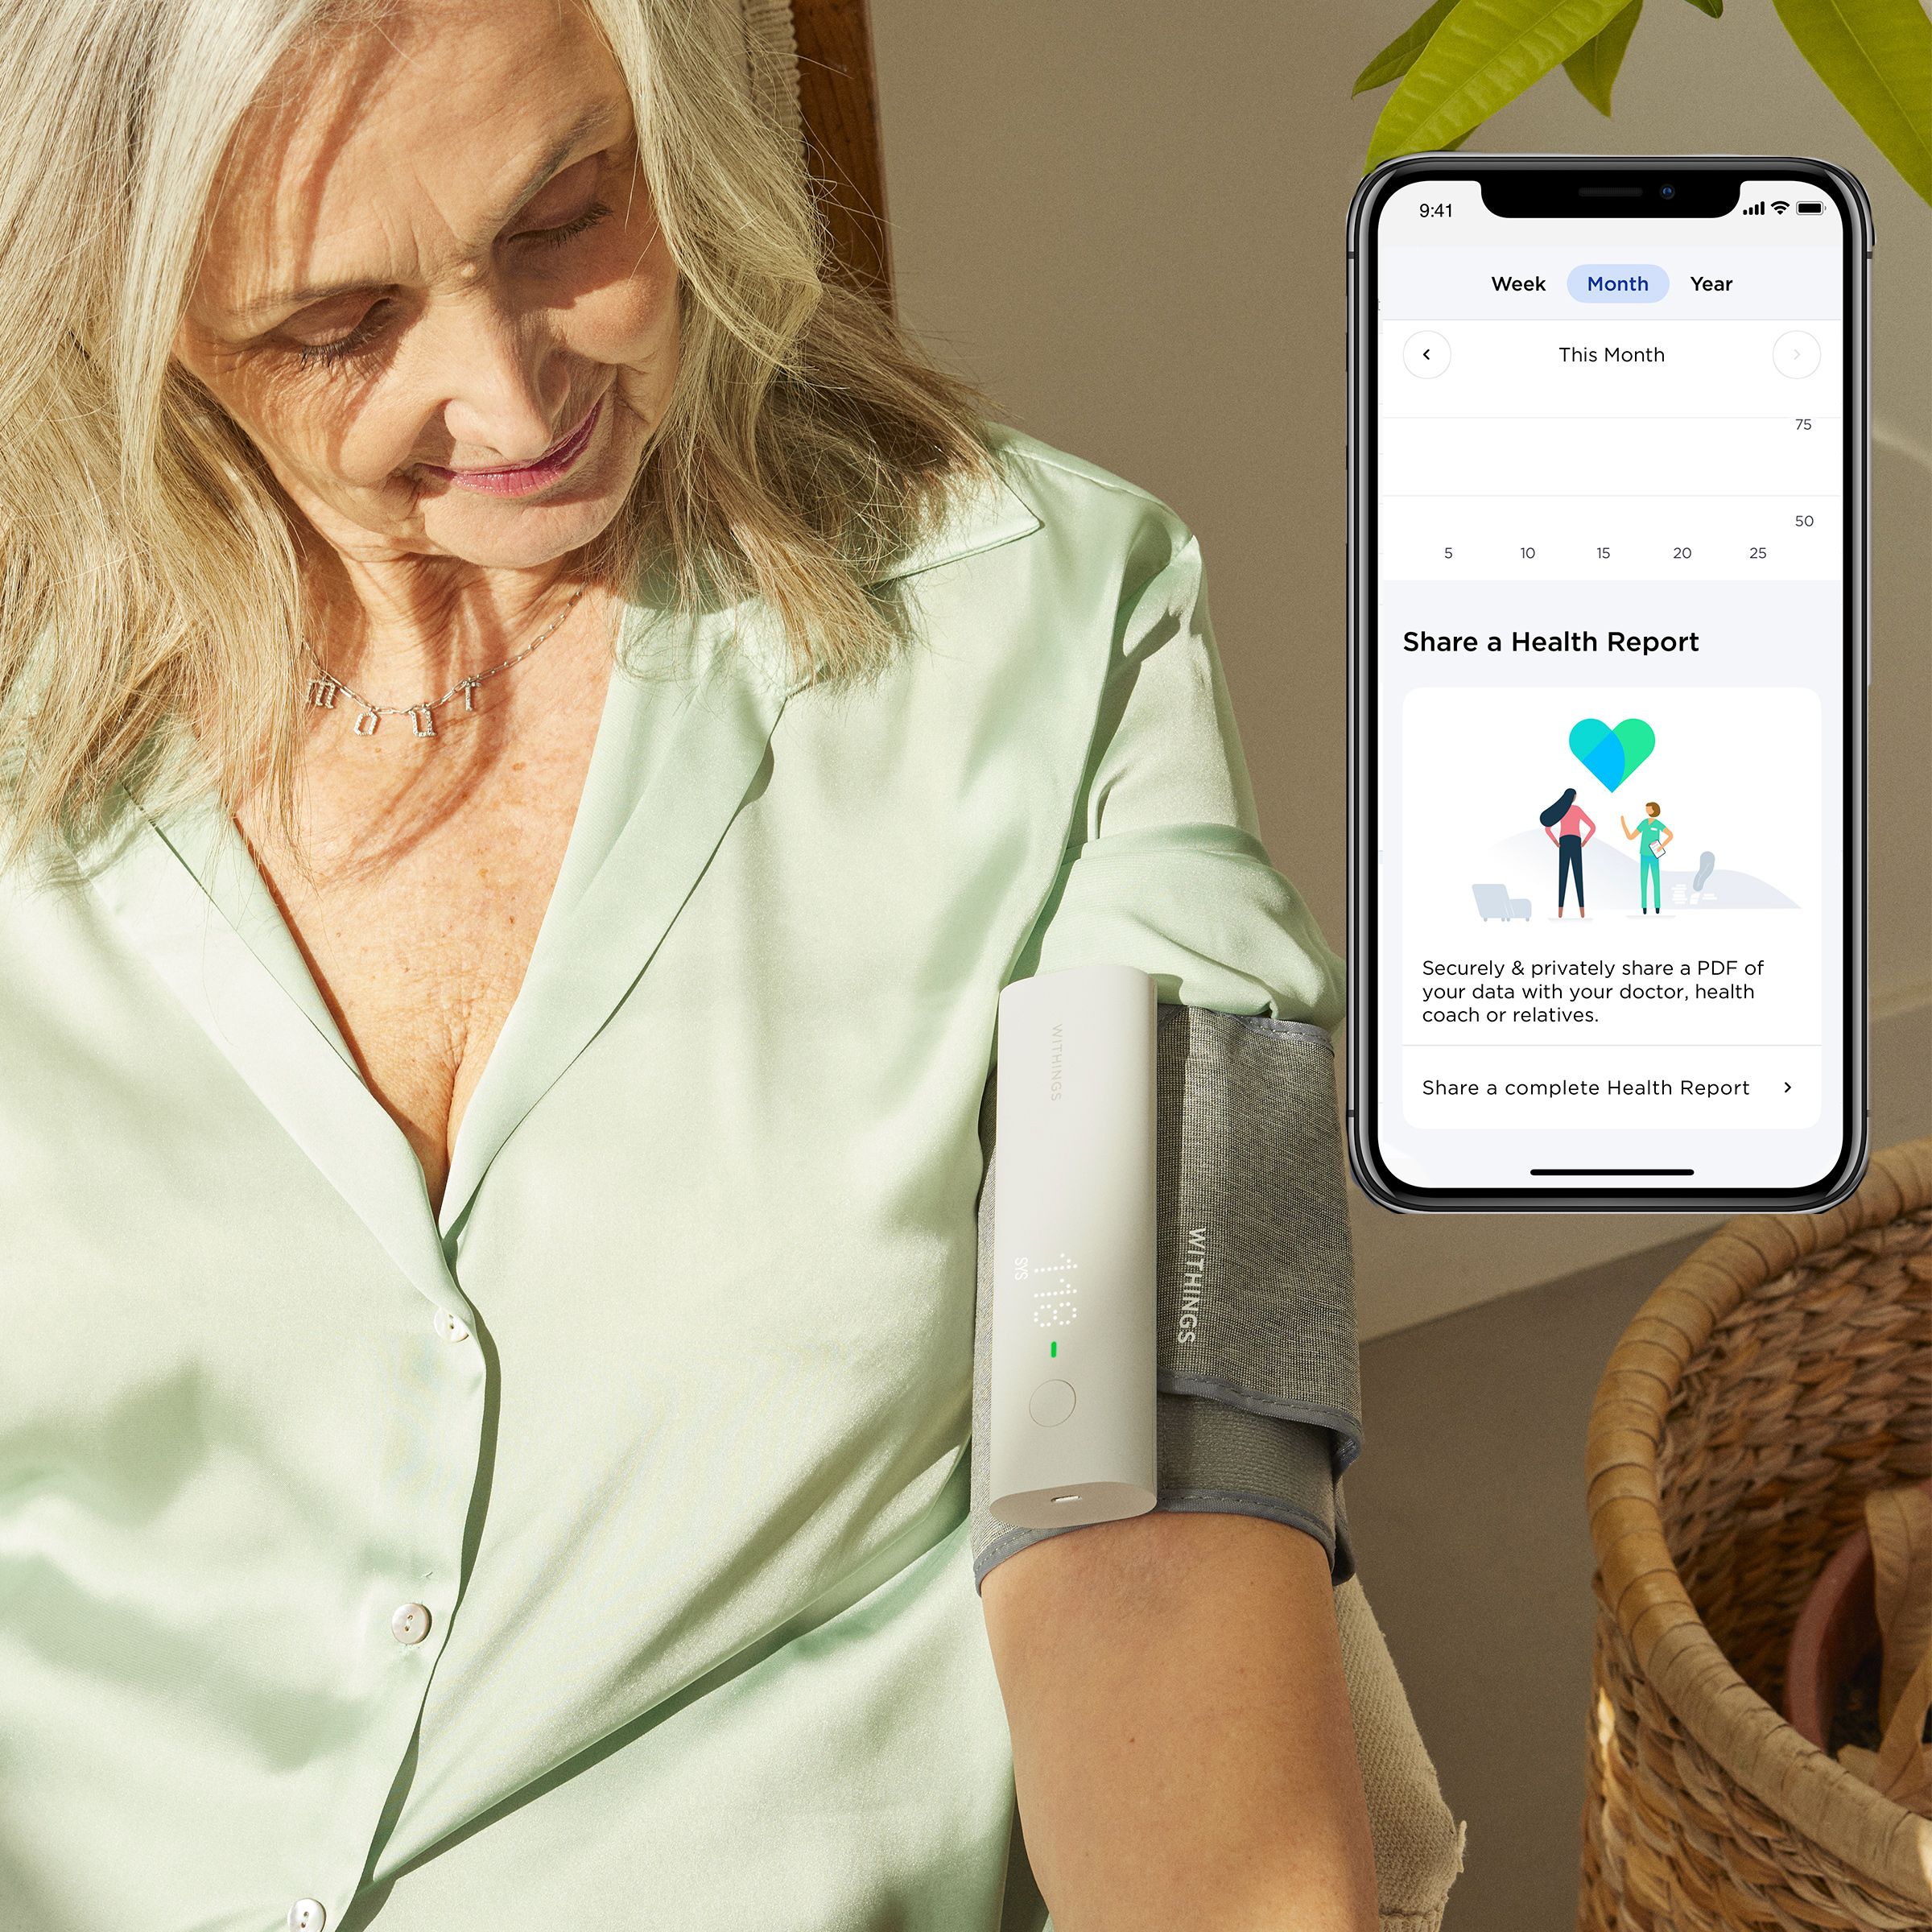 Withings BPM Connect Wi-Fi Smart Blood Pressure Monitor